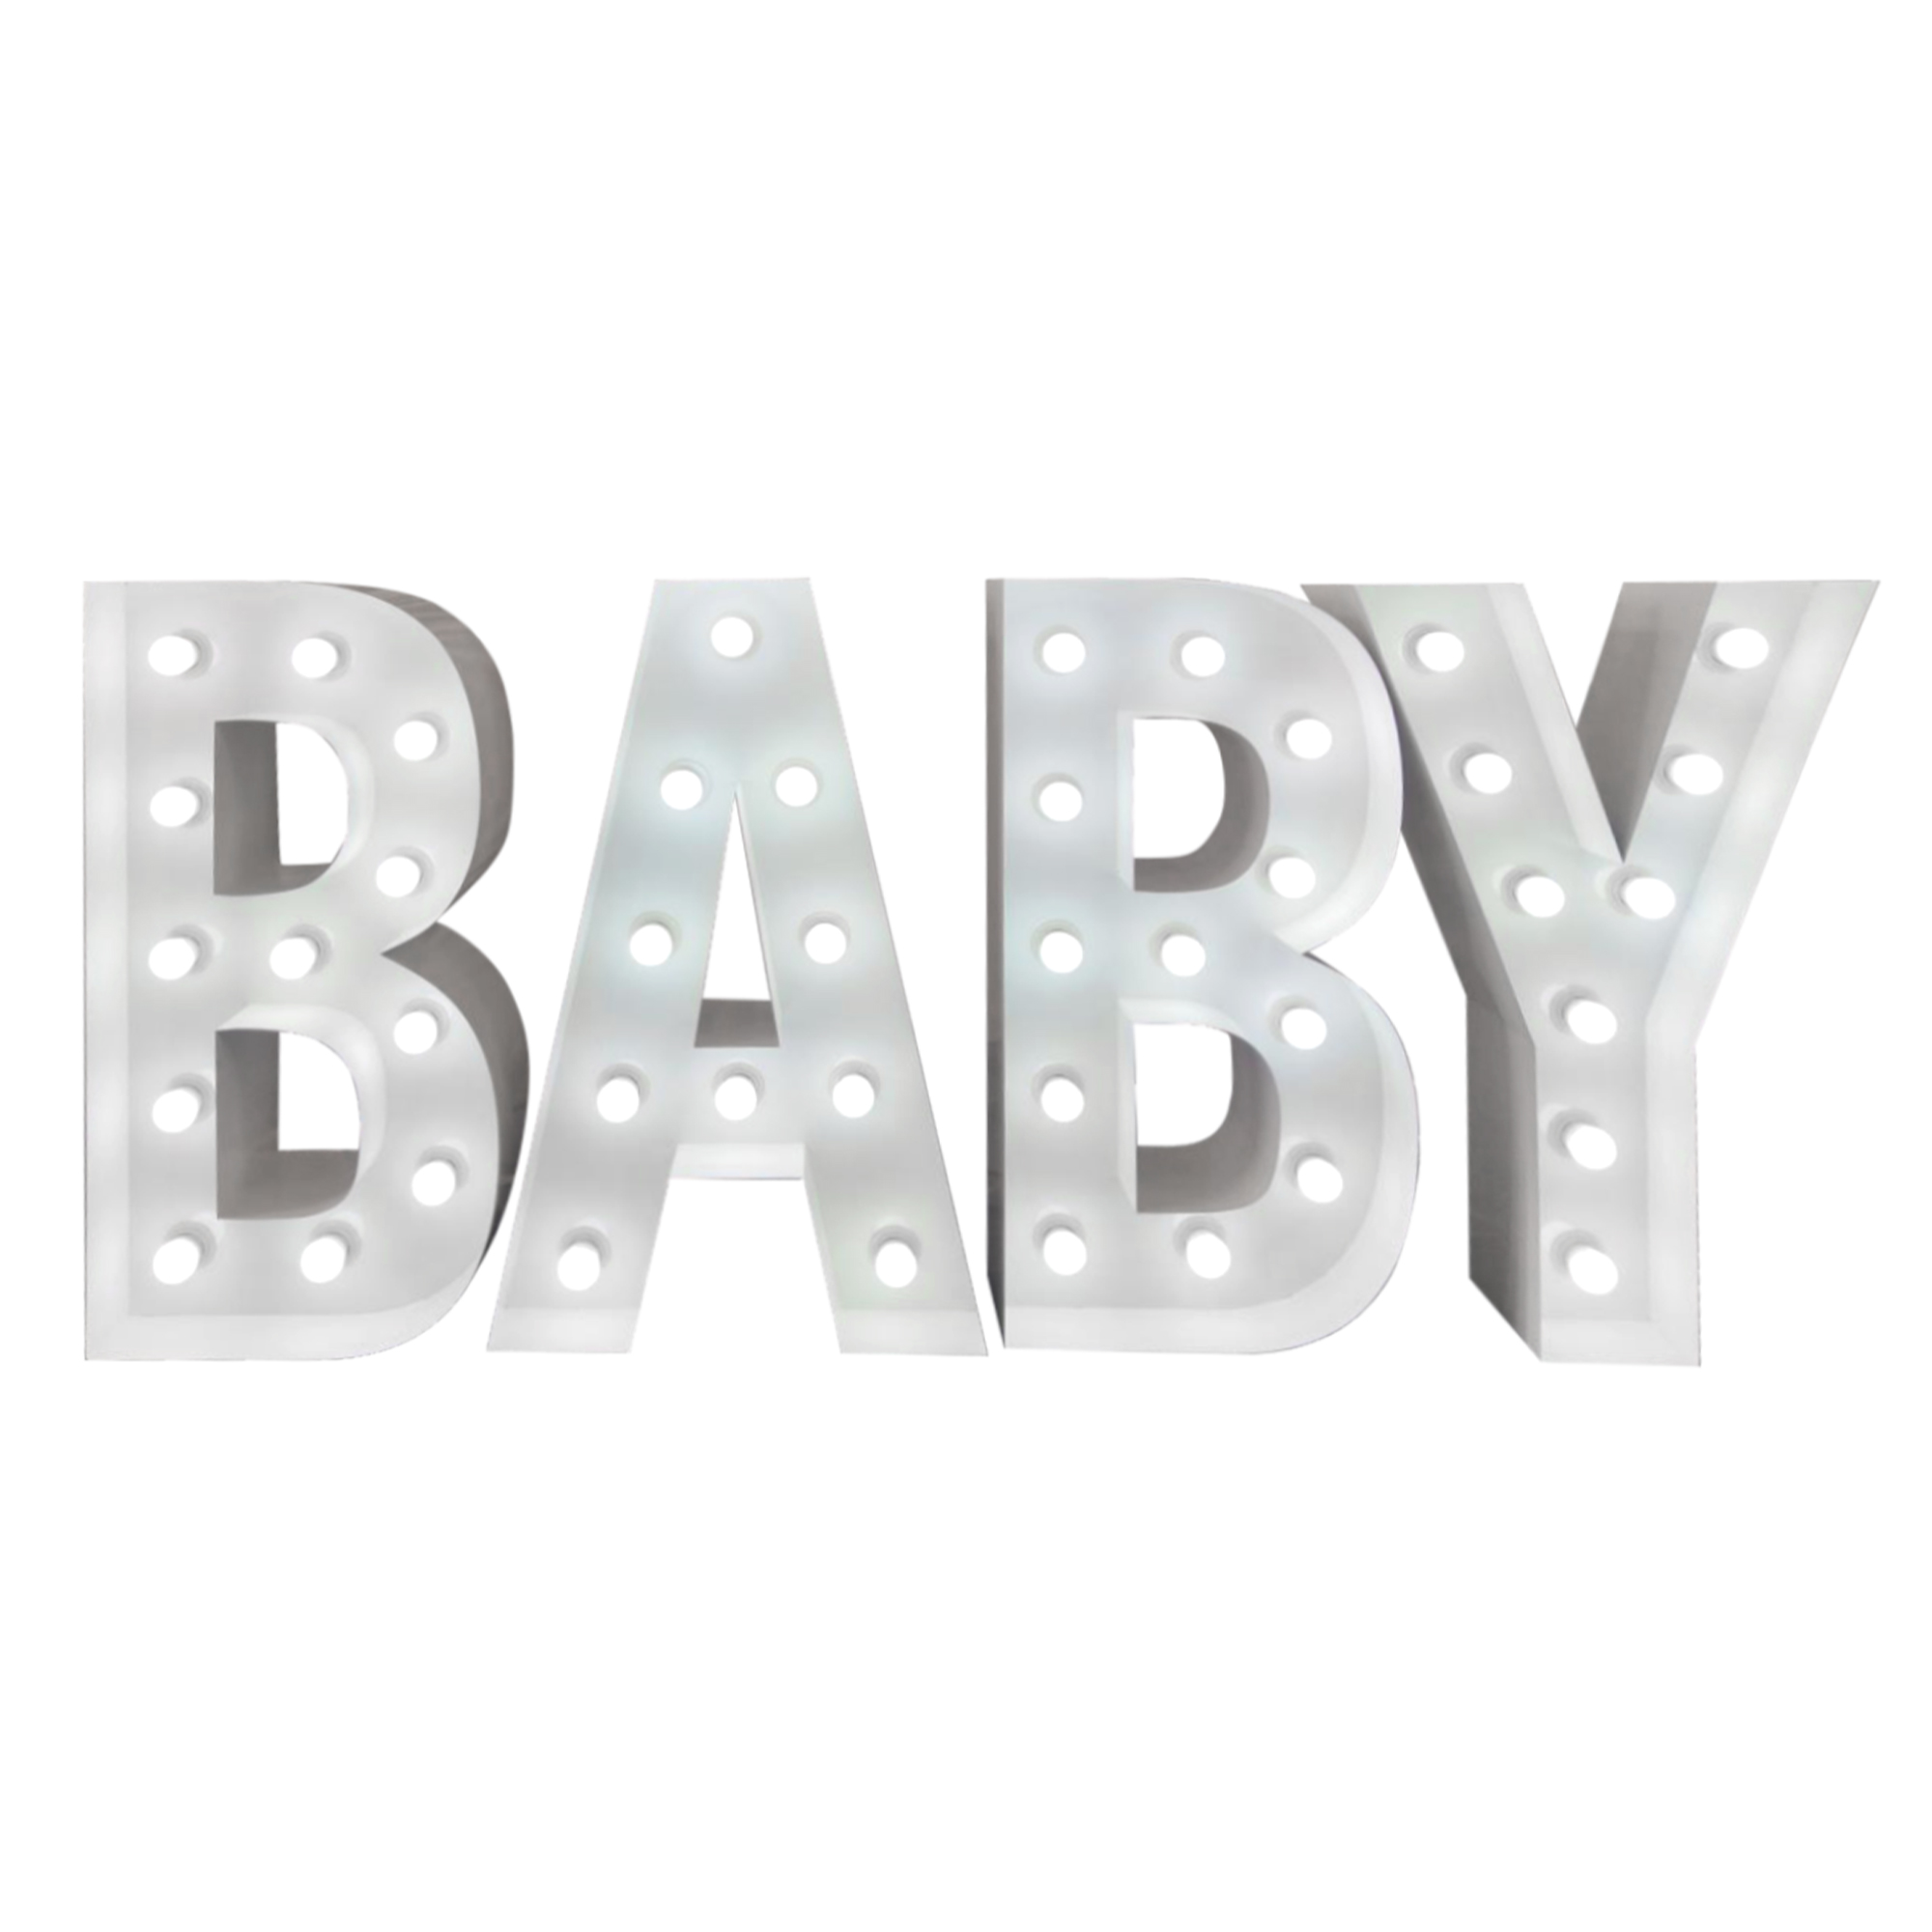 4ft Light Up Marquee Letters “BABY” - White